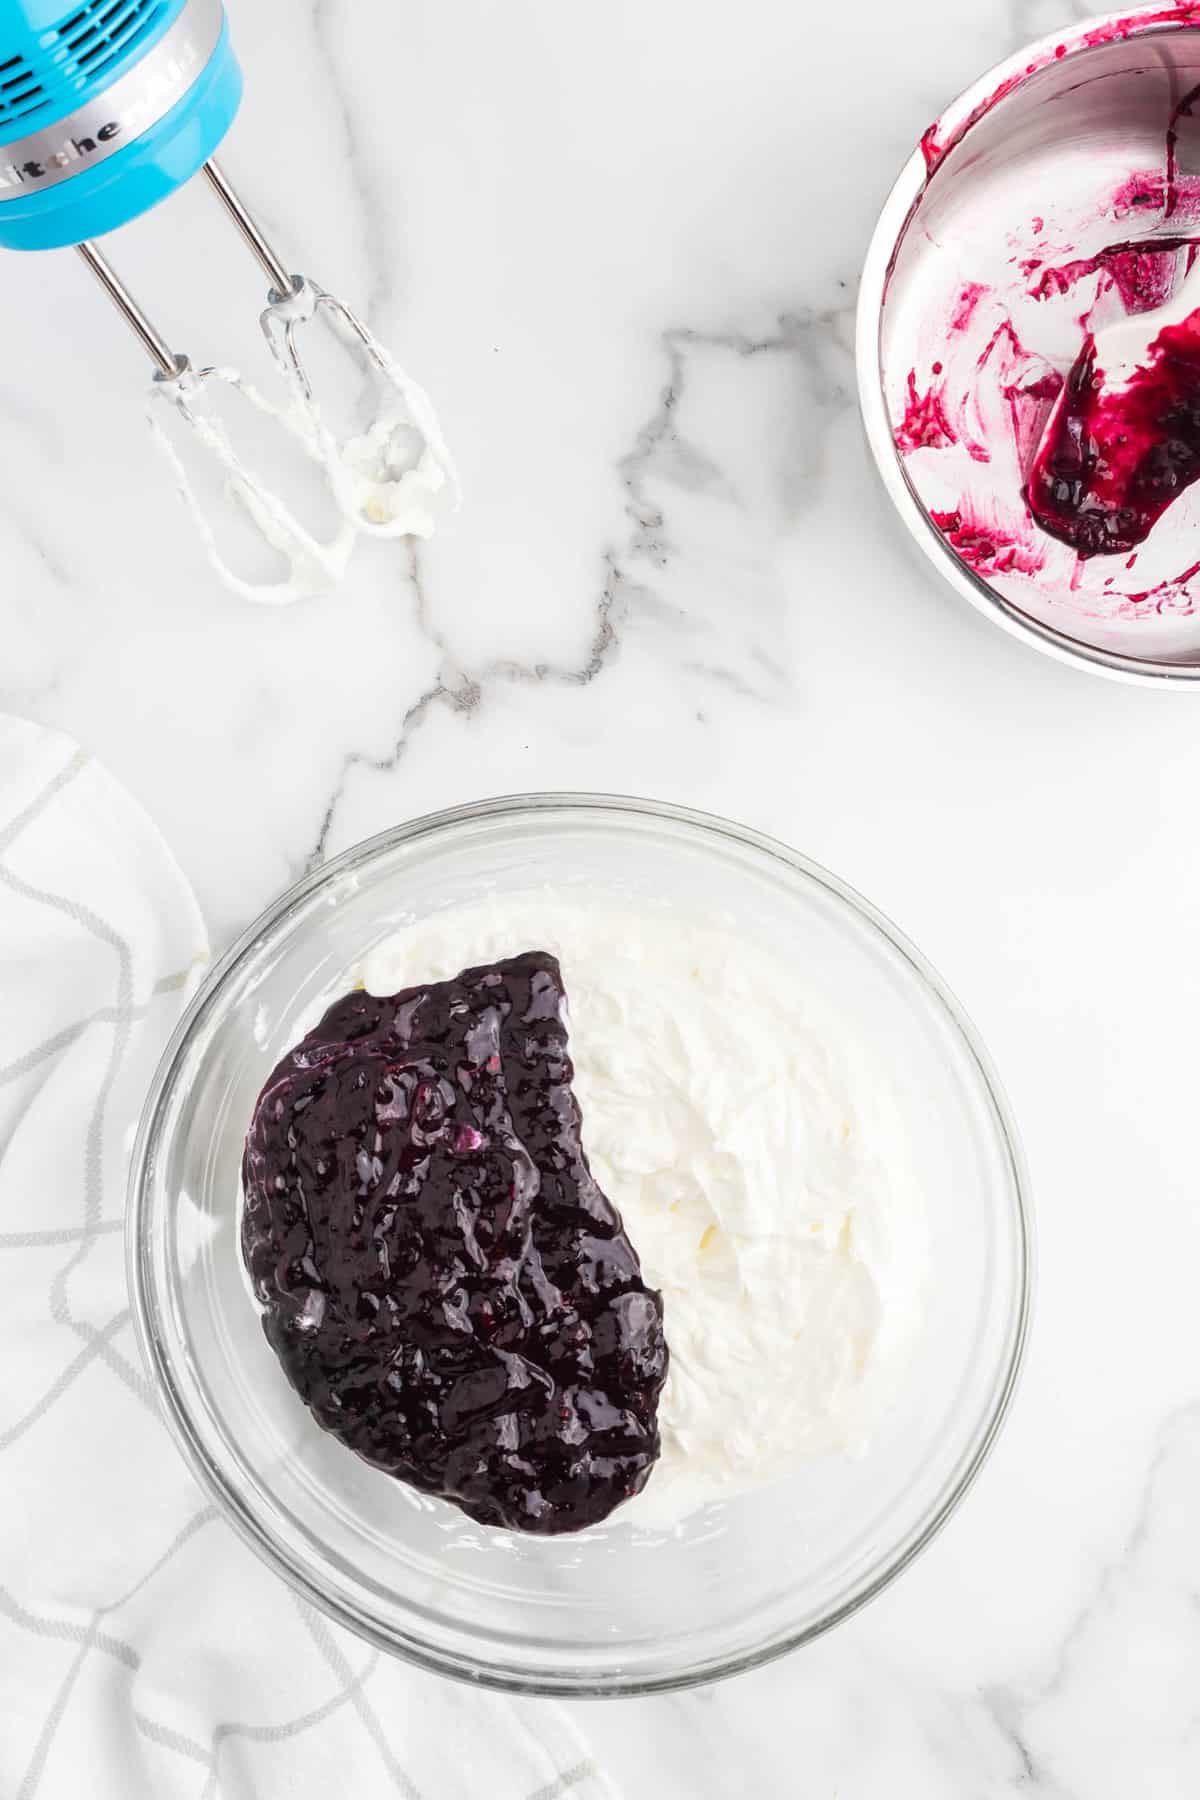 Whipped cream with blueberry mixture in bowl for No Bake Blueberry Cheesecake recipe